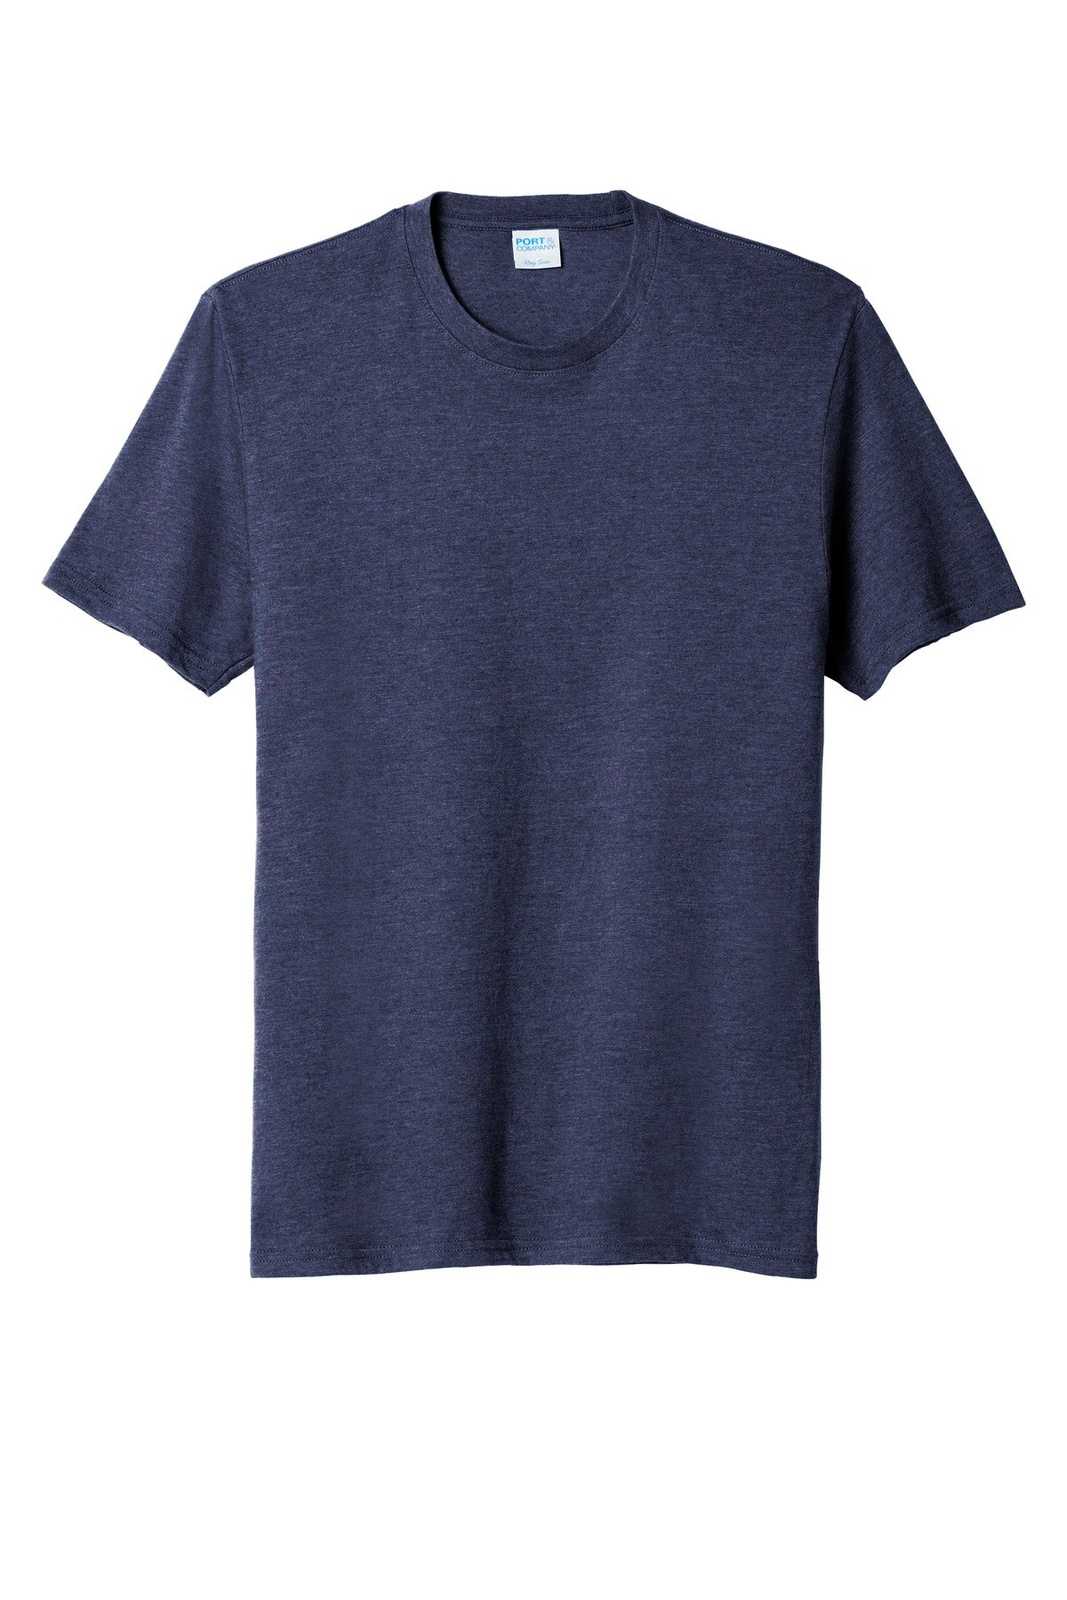 Port &amp; Company PC455 Fan Favorite Blend Tee - Team Navy Heather - HIT a Double - 5